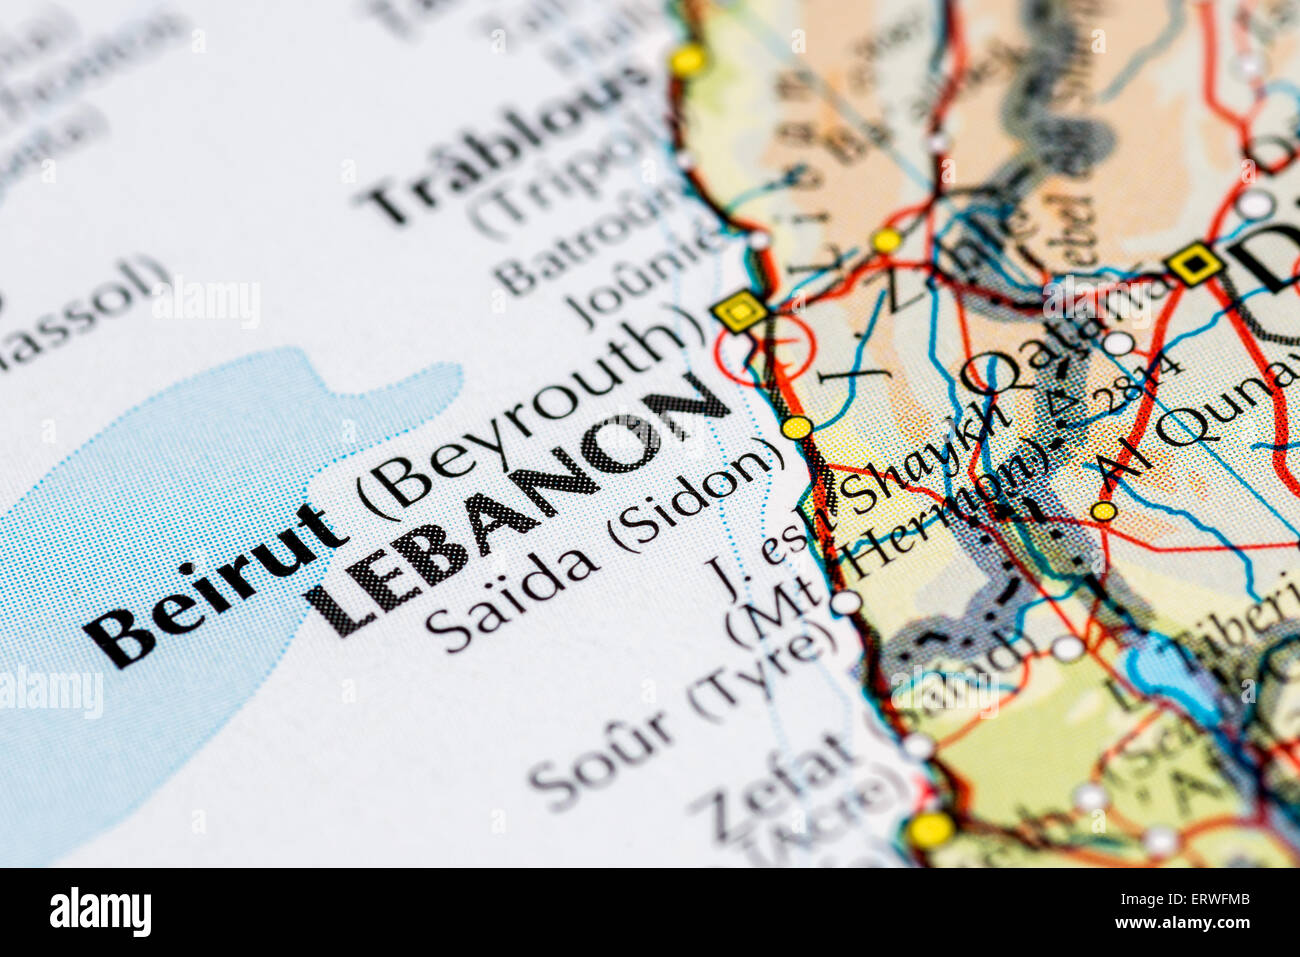 Close up map of Beirut and the Lebanon Stock Photo